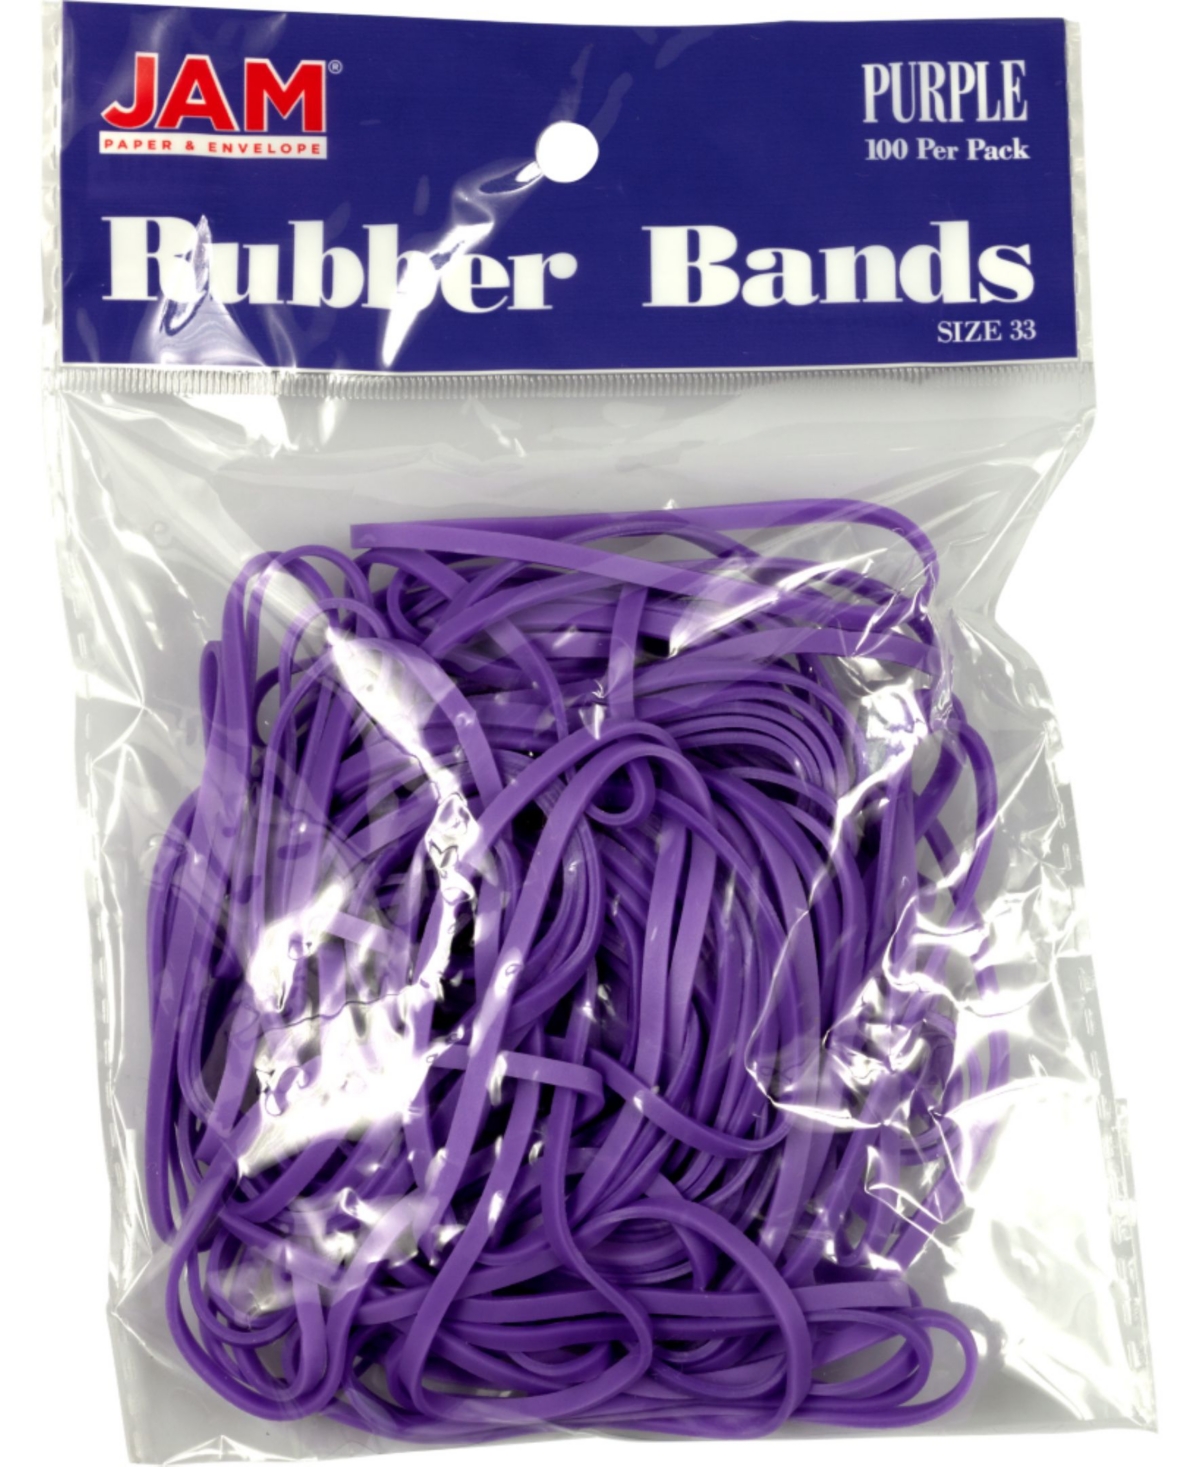 Colorful Rubber Bands - Size 33 - 100 Per Pack - Purple